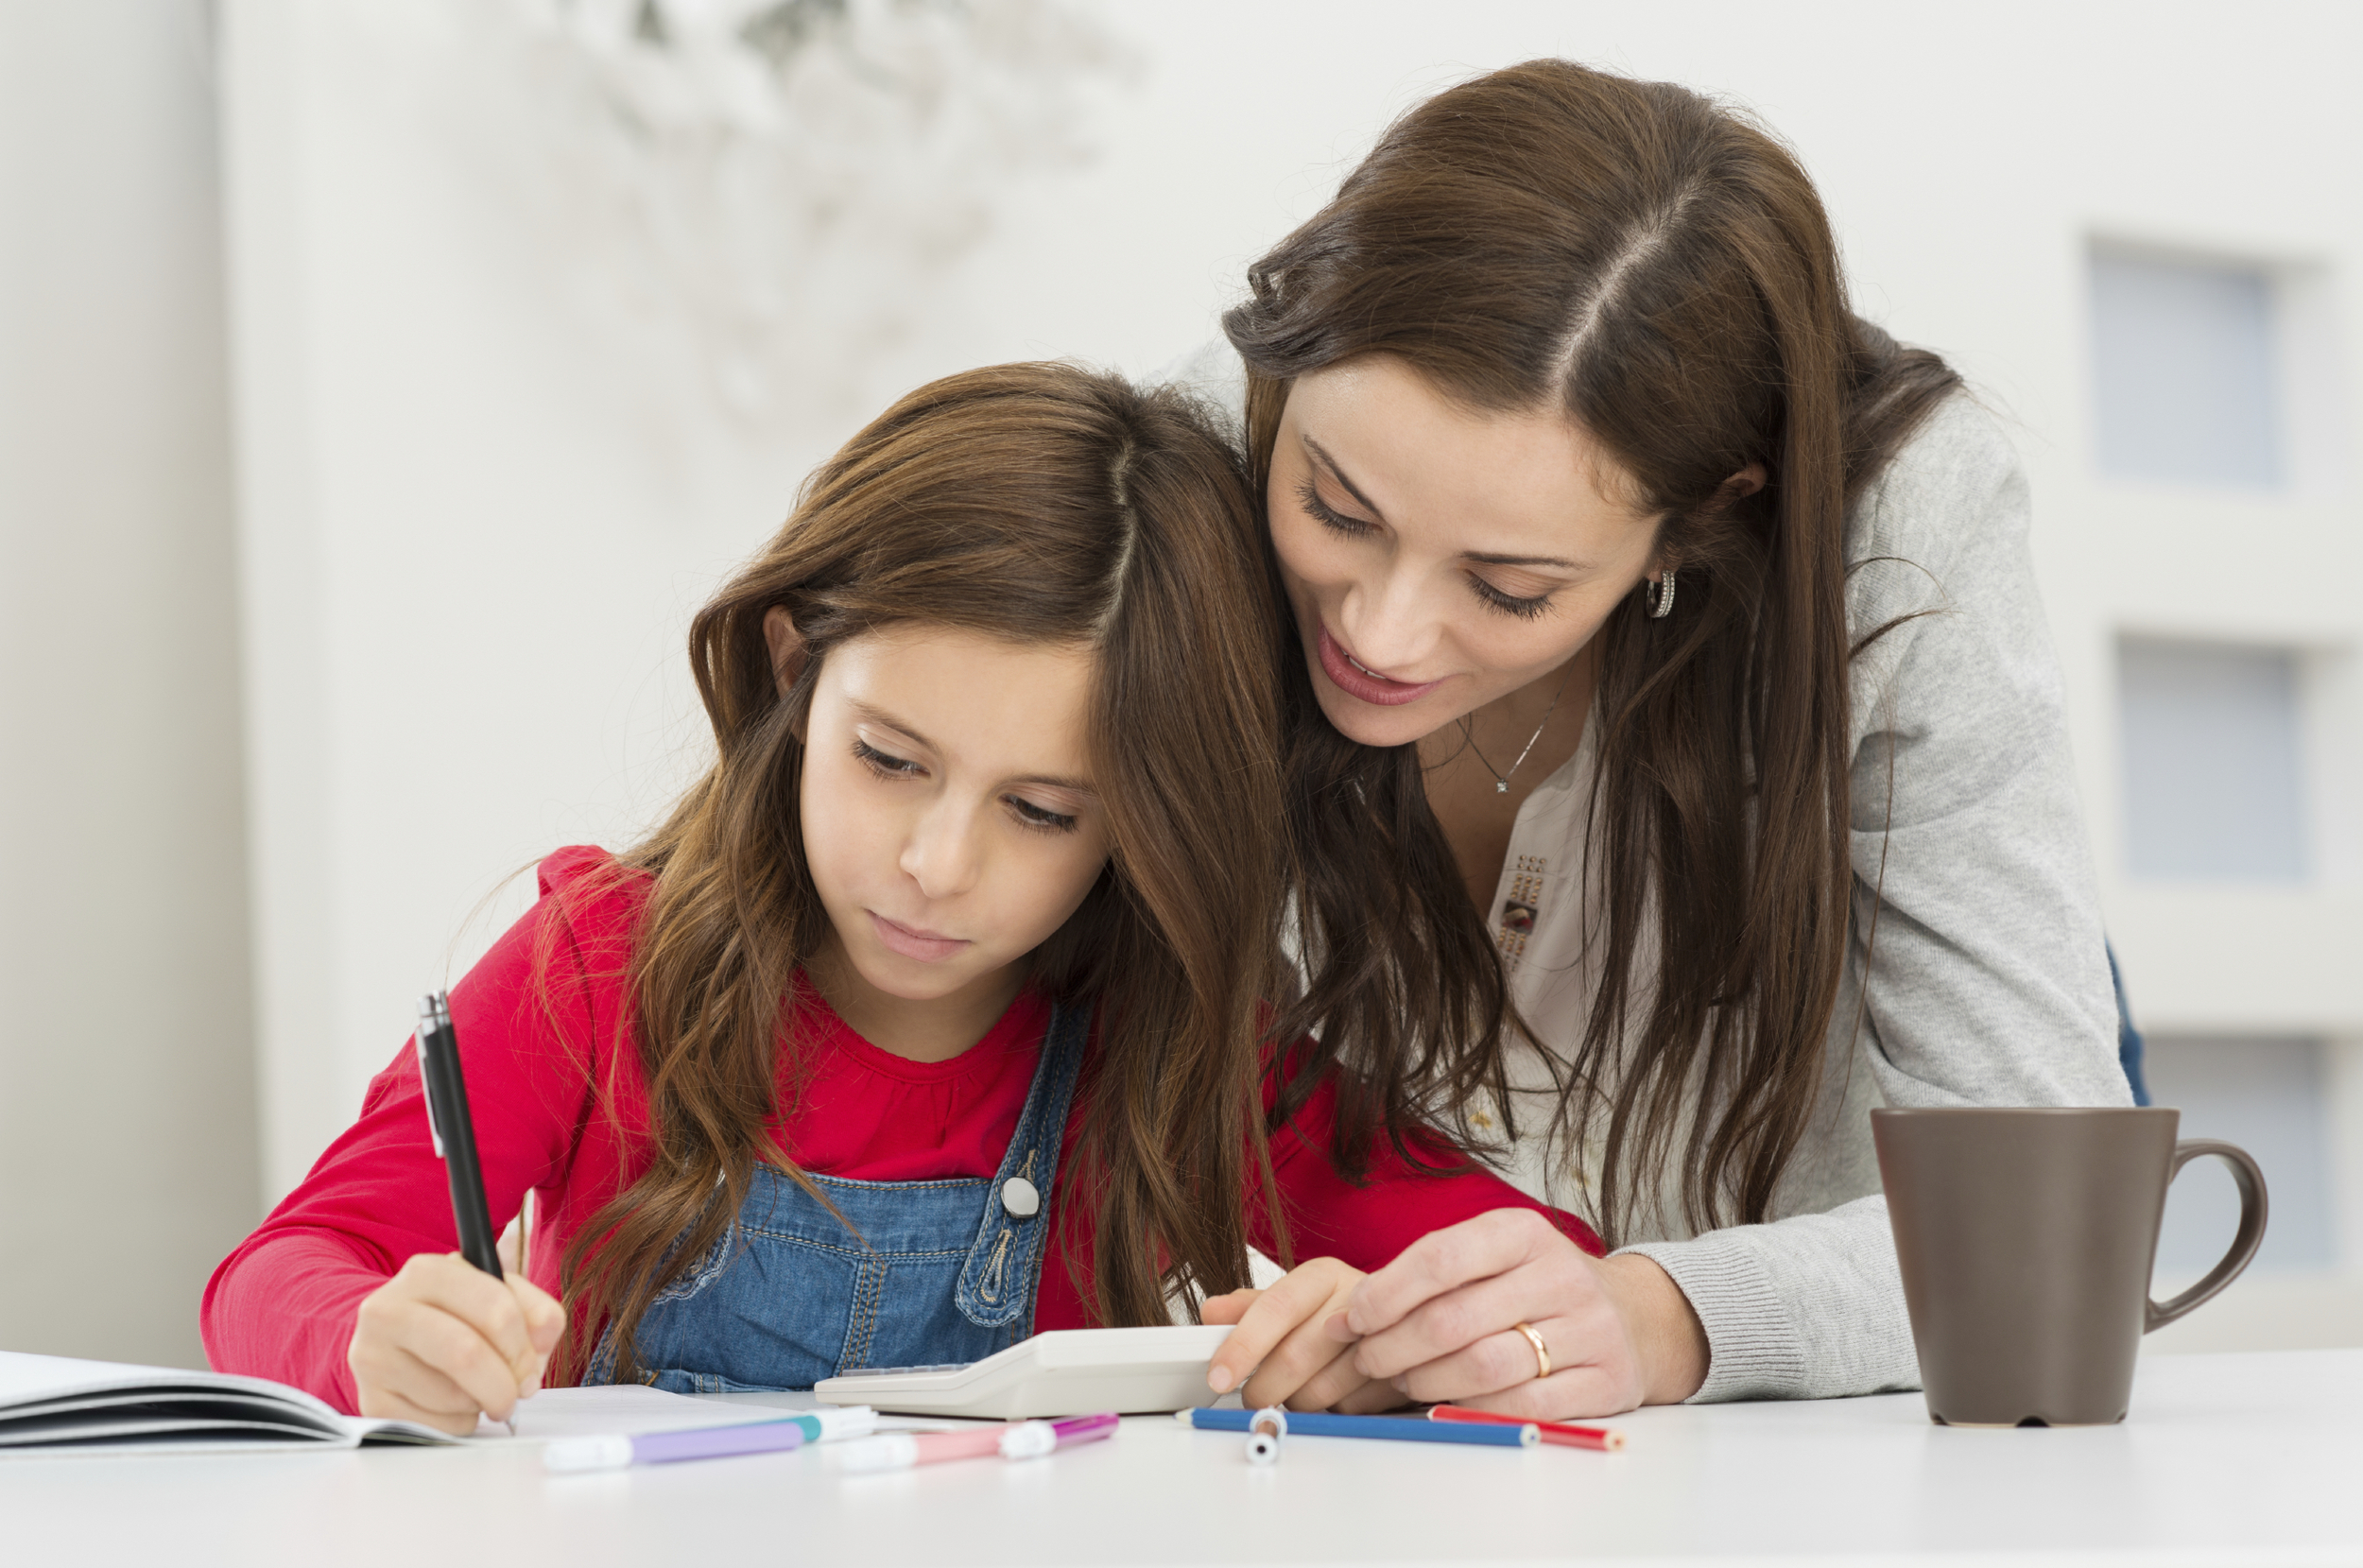 Homework Strategies To Help Your Child & Not Do It For